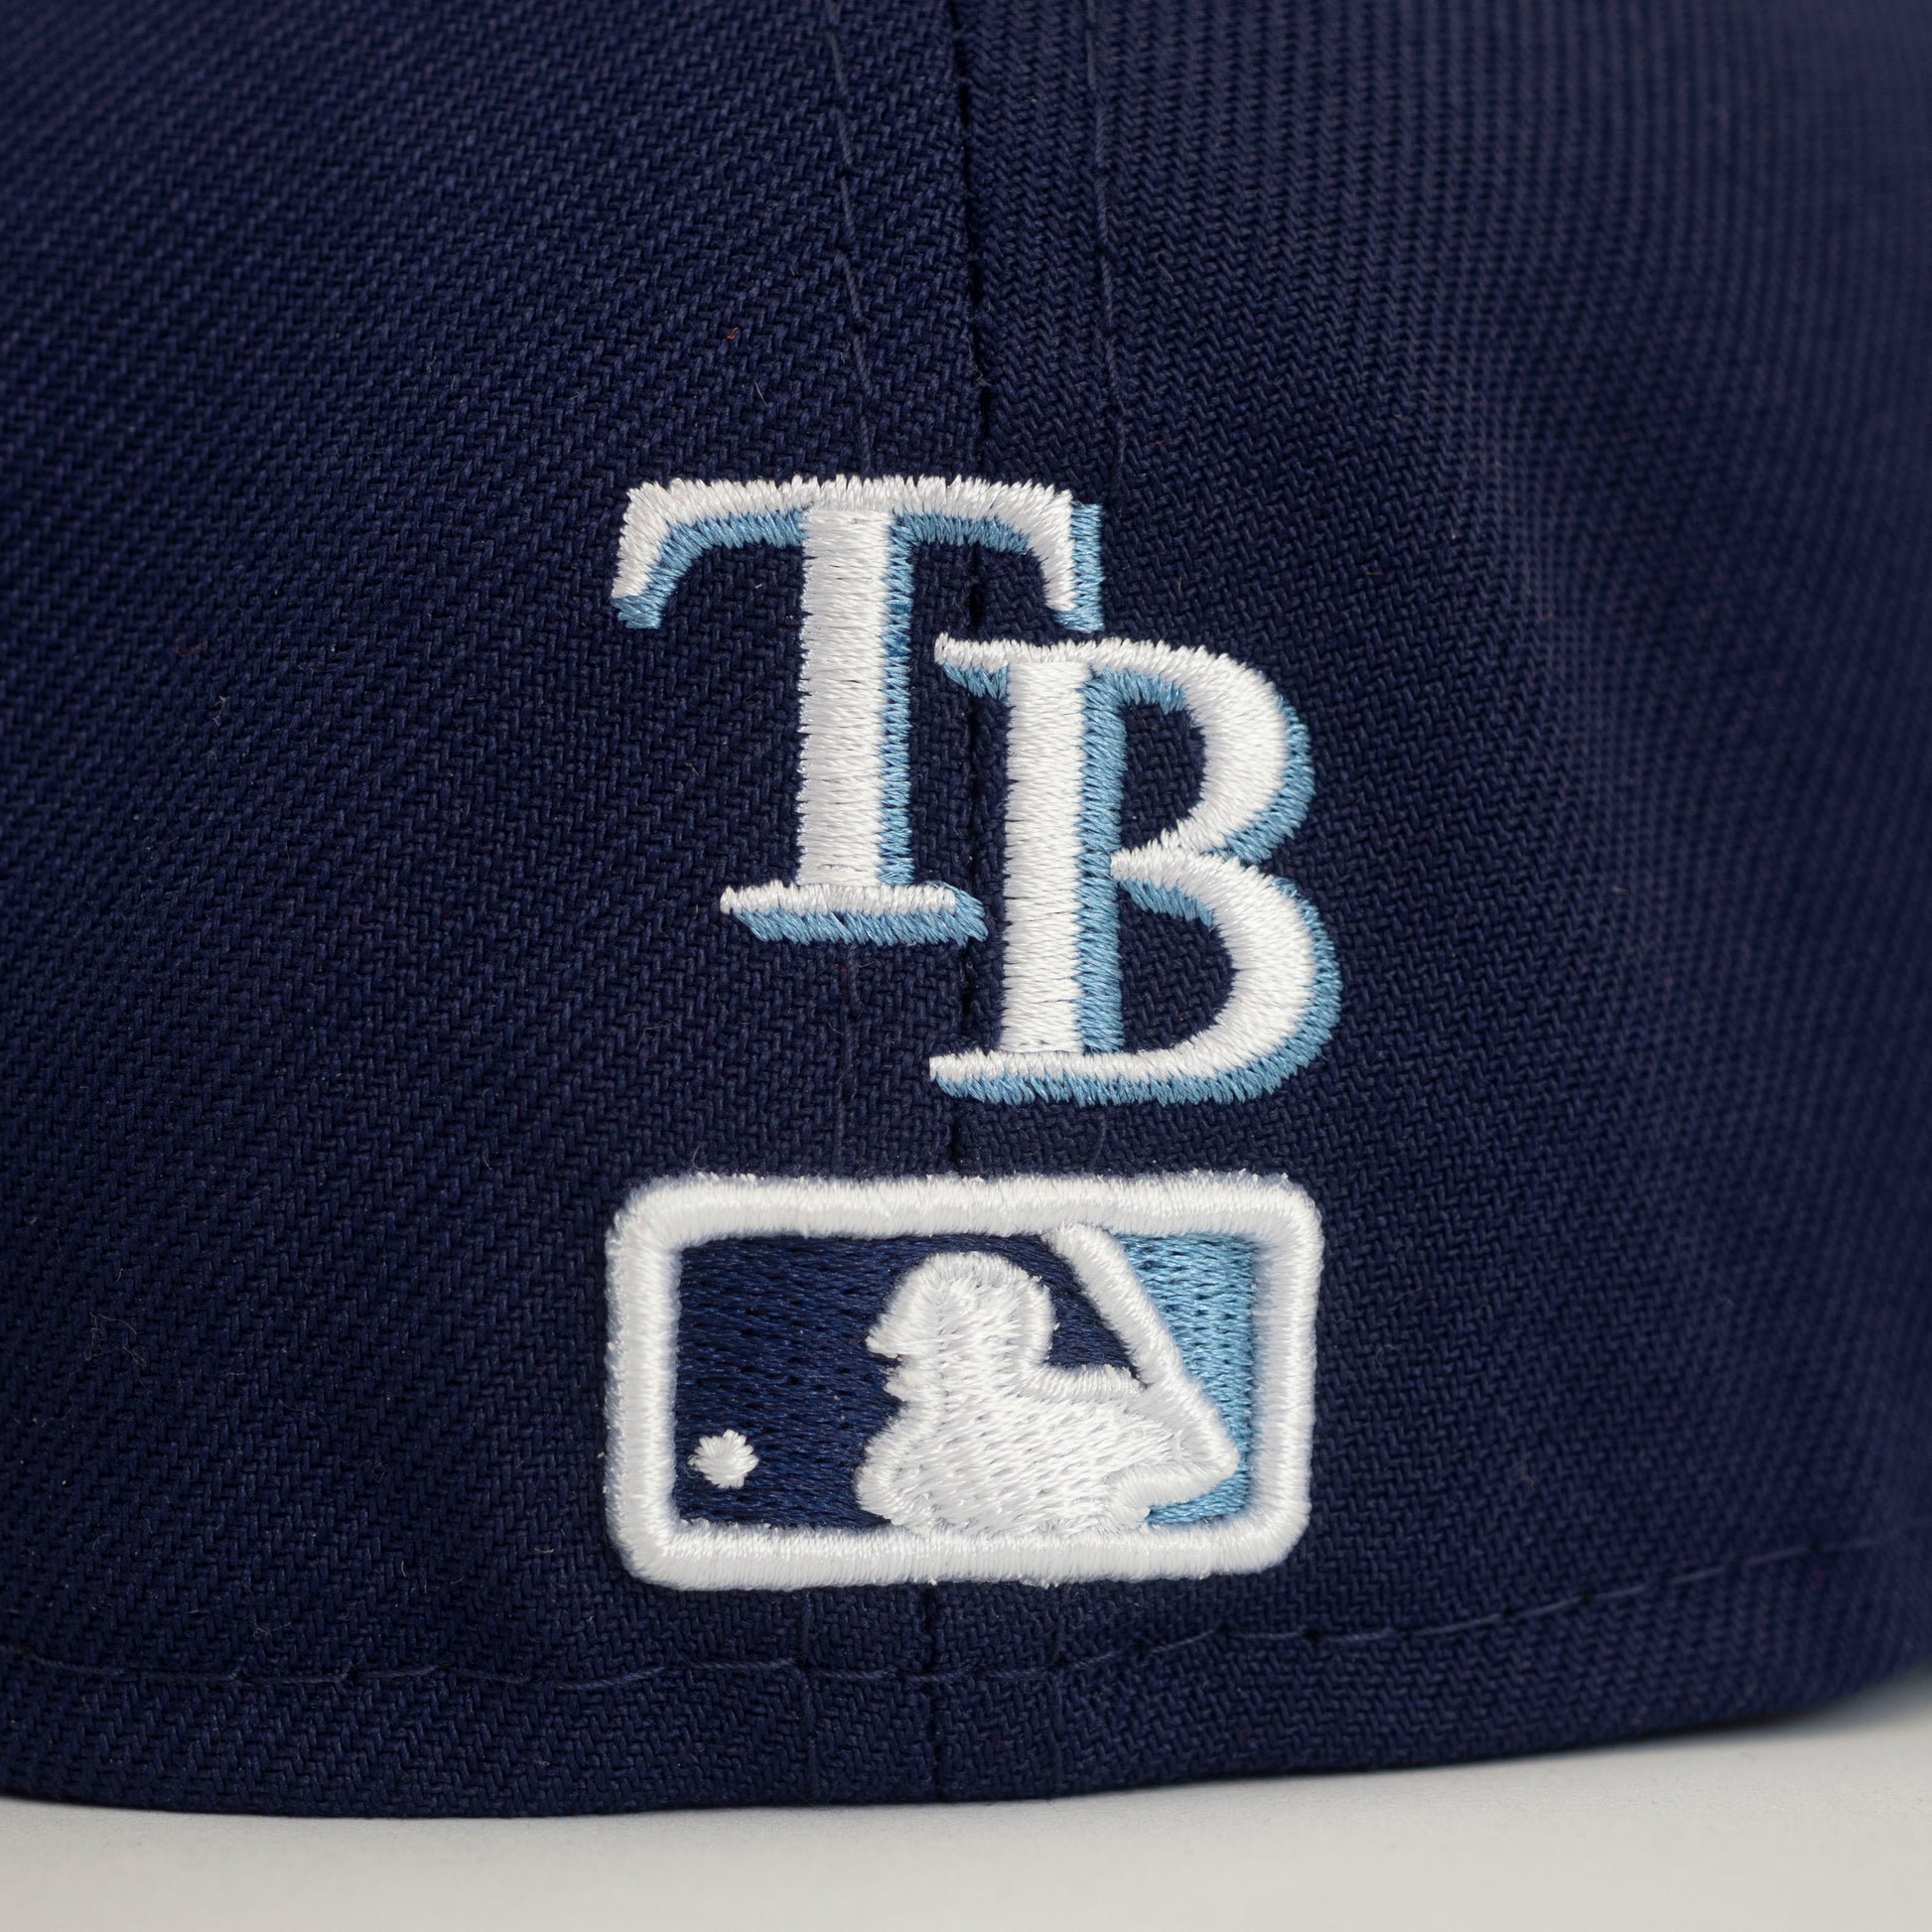 Tampa Bay Rays EVOLUTION-PATCHES Navy Fitted Hat by New Era